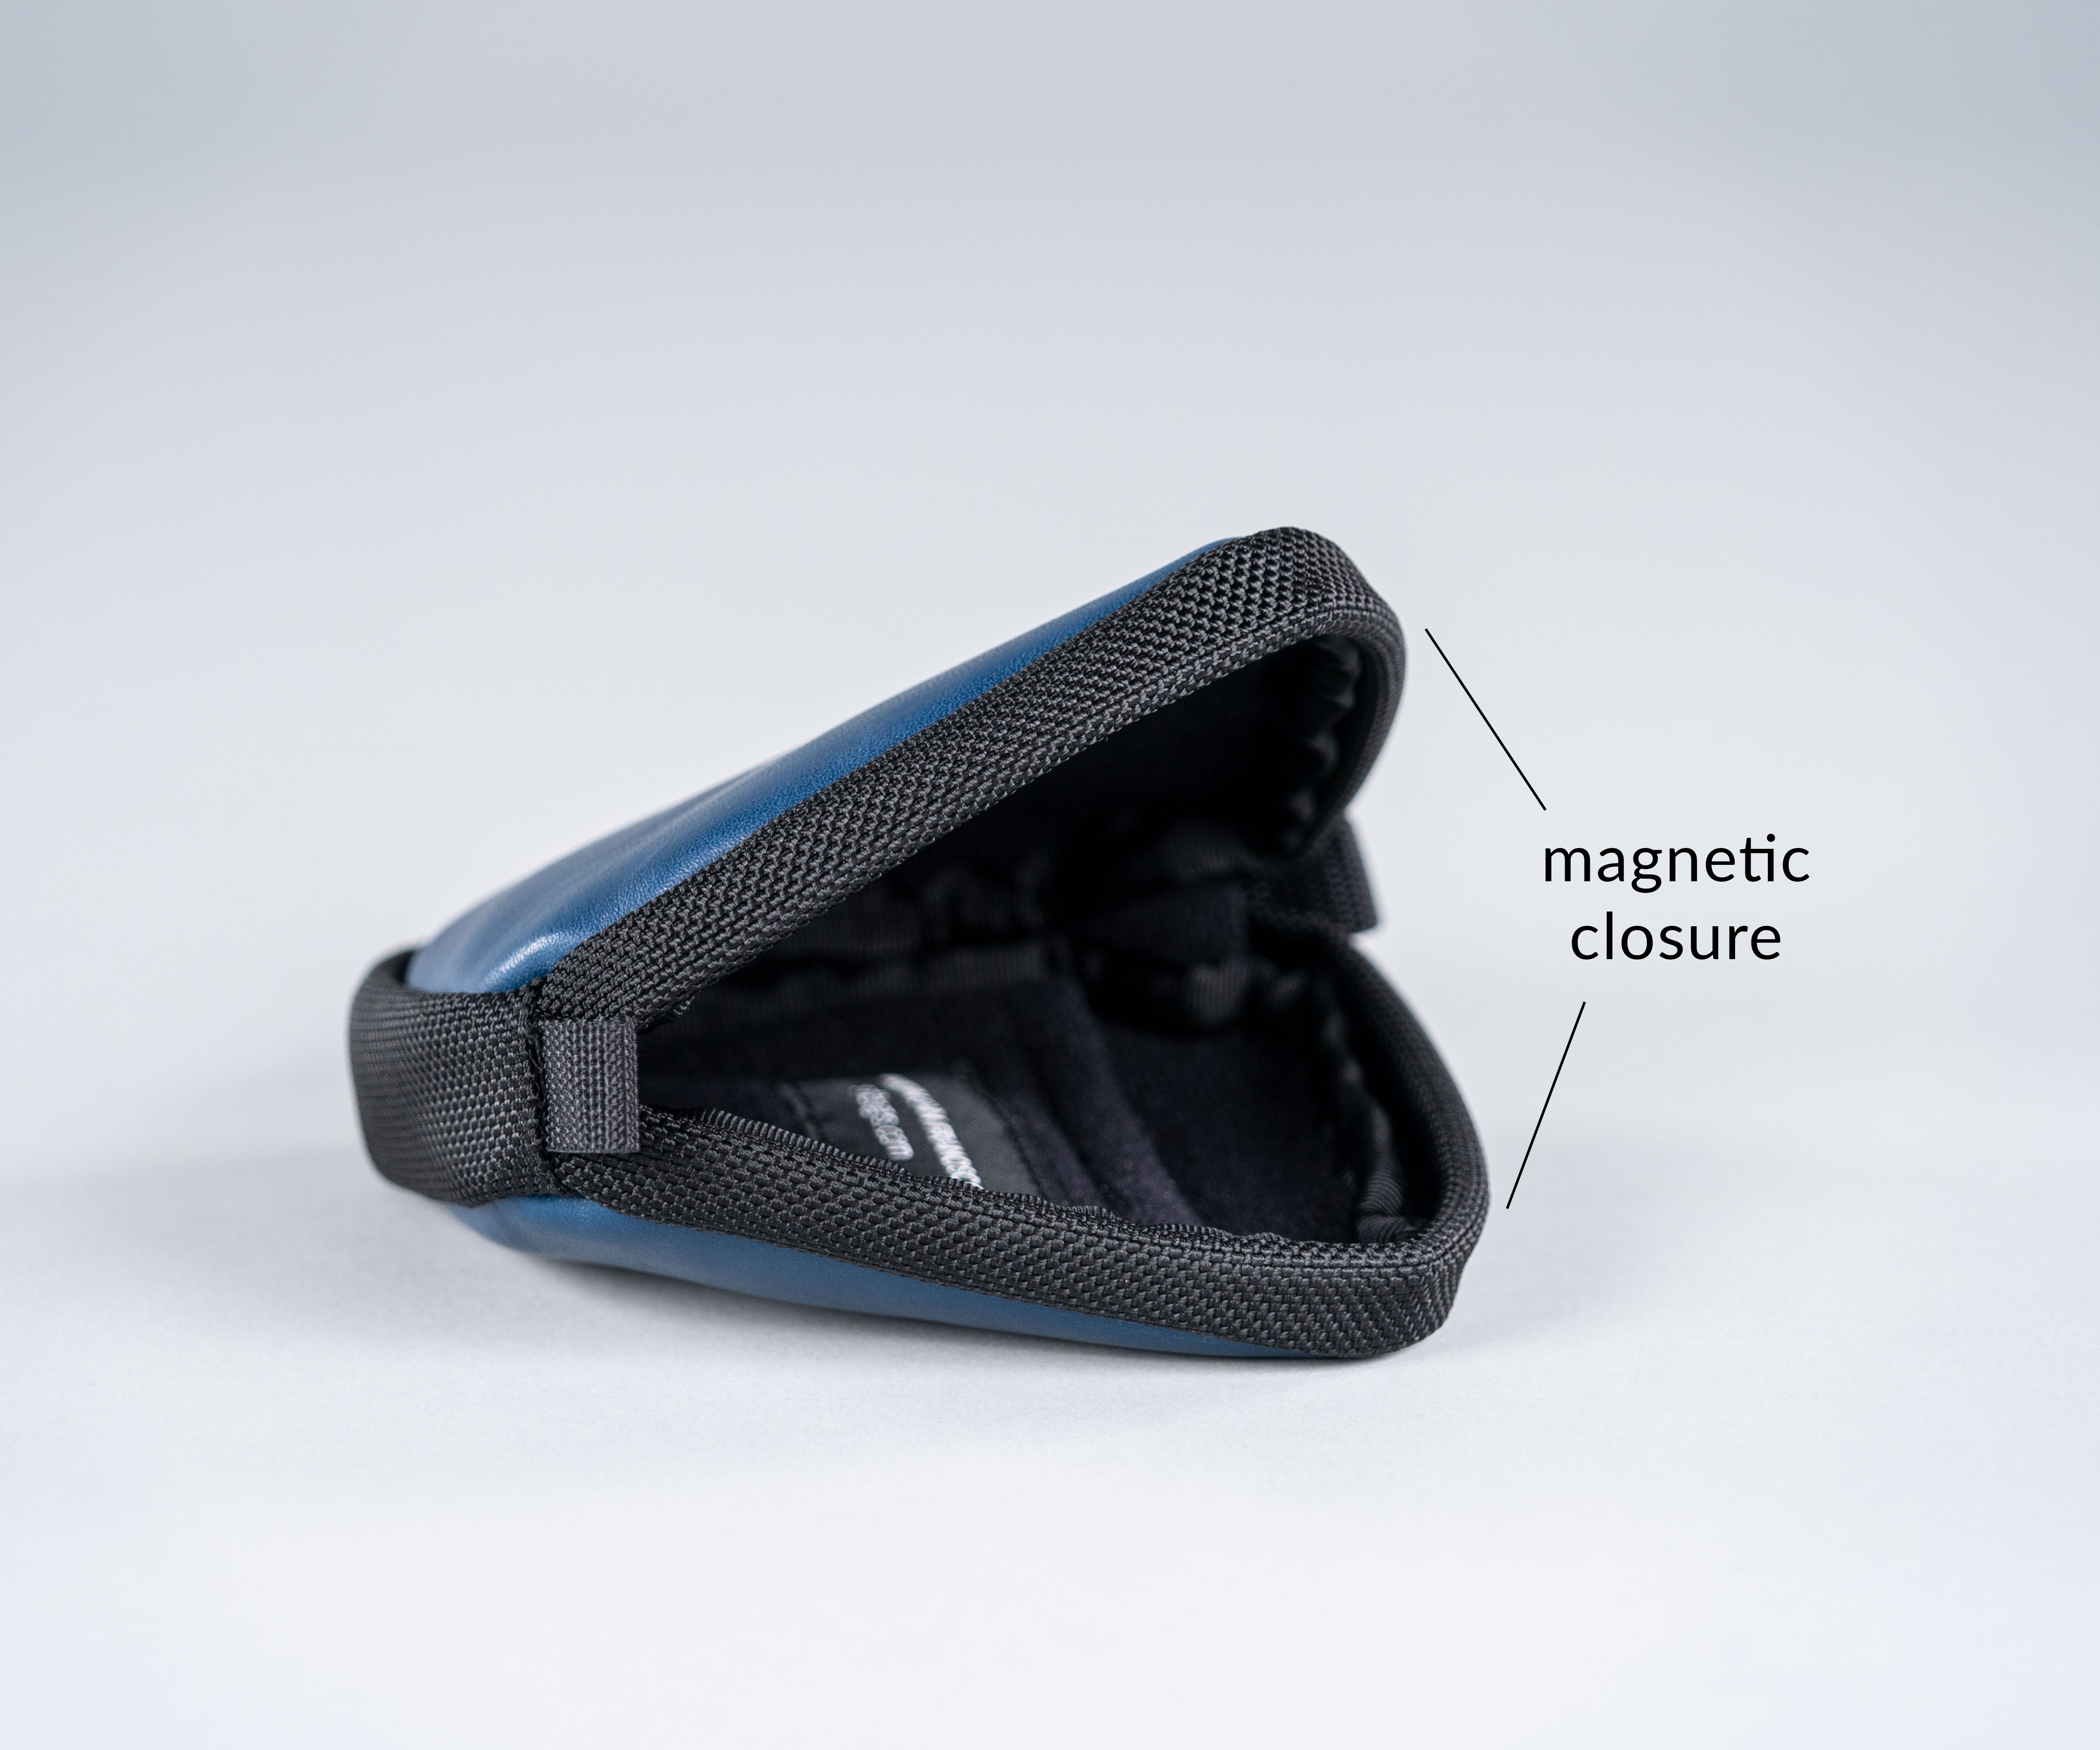 Magnetic “zipper” secures the main compartment, acts as a protective bumper, and allows in-case charging.